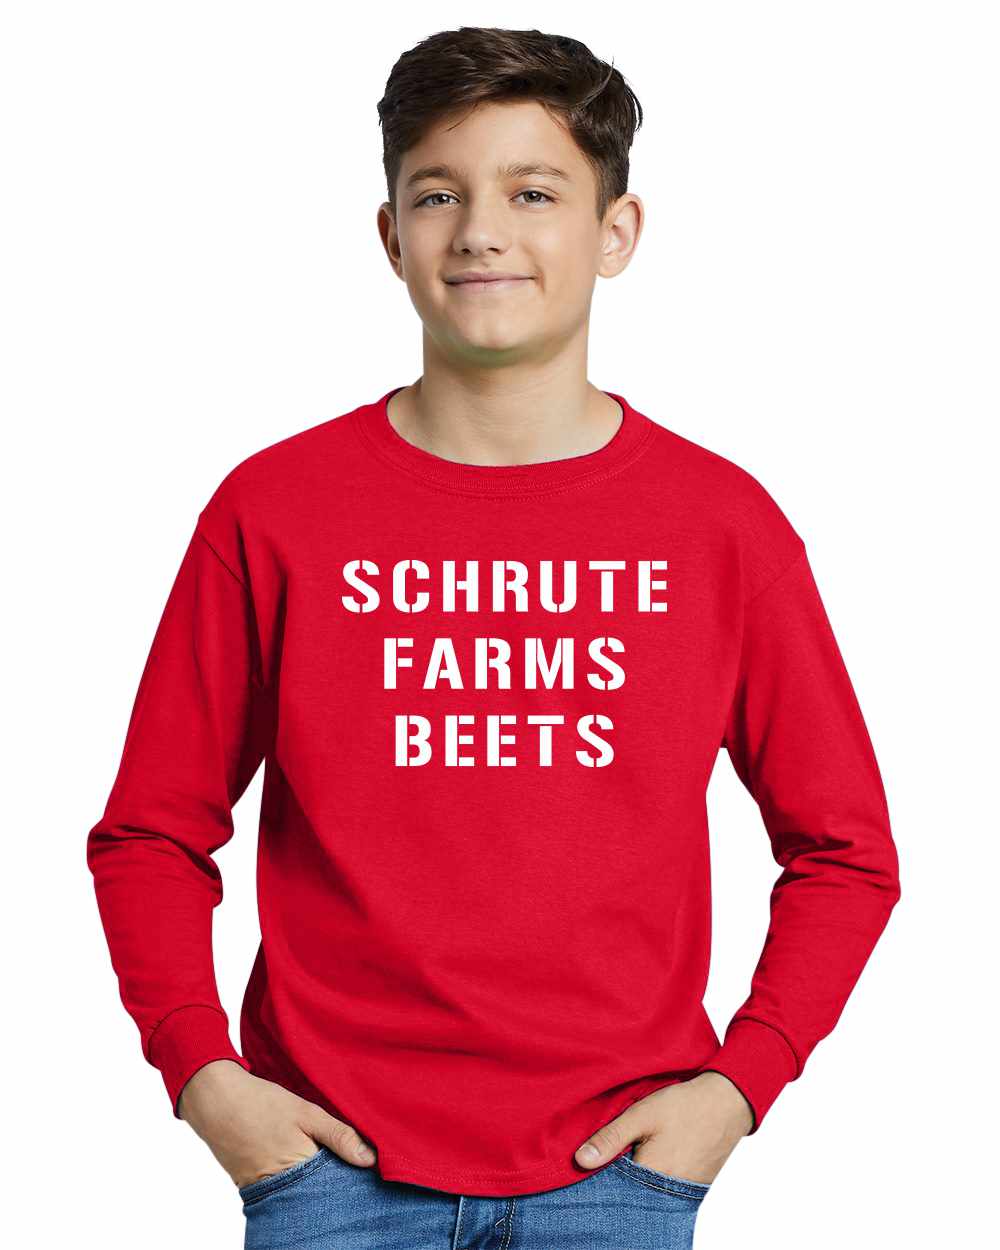 SCHRUTE FARMS BEETS on Youth Long Sleeve Shirt